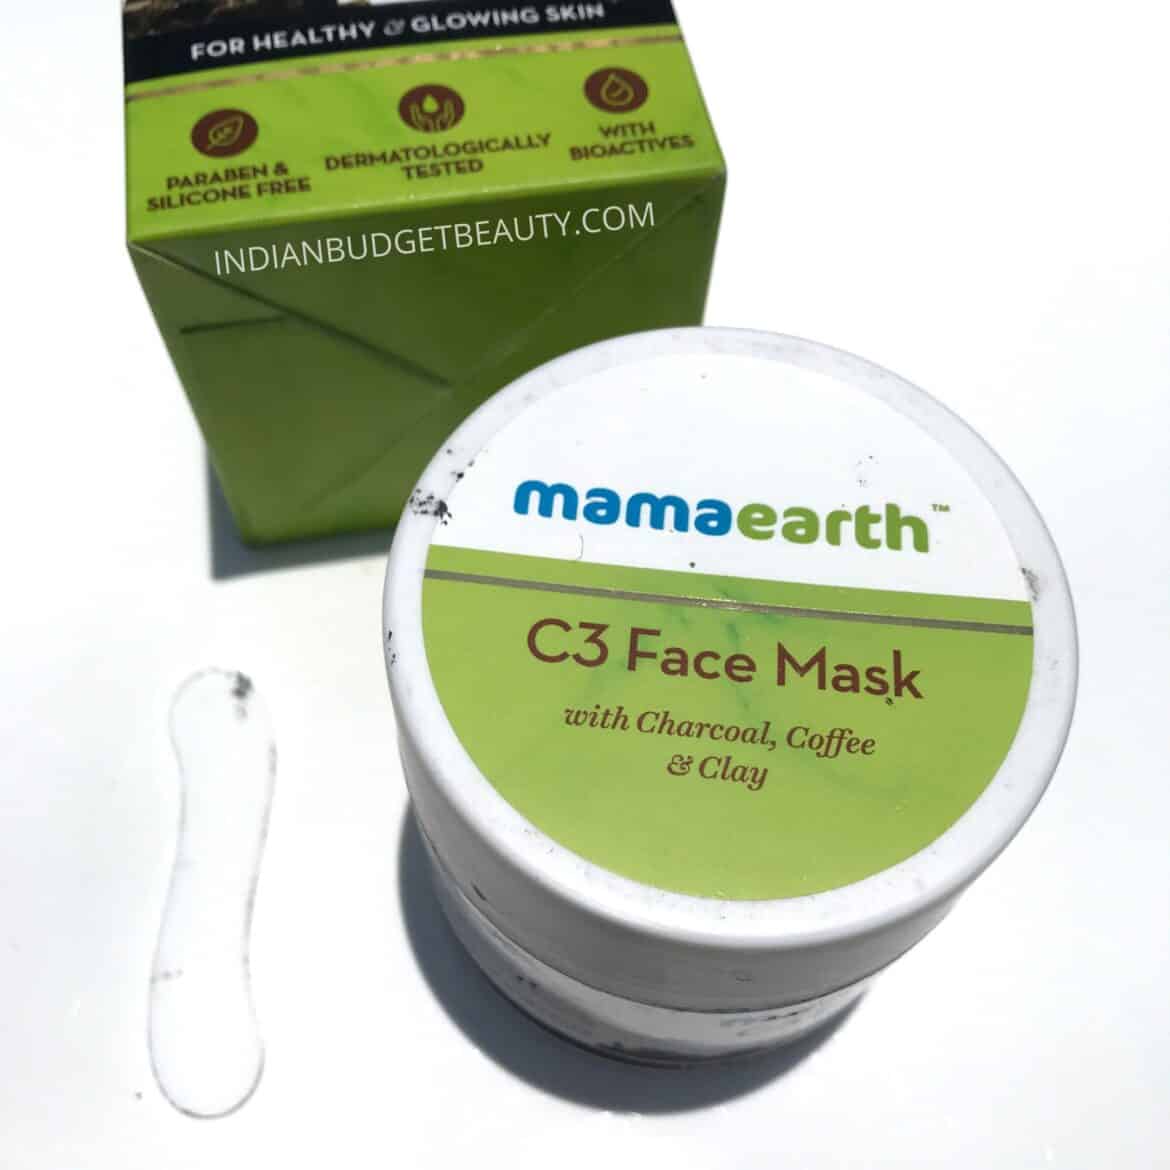 mamaearth c3 face mask review